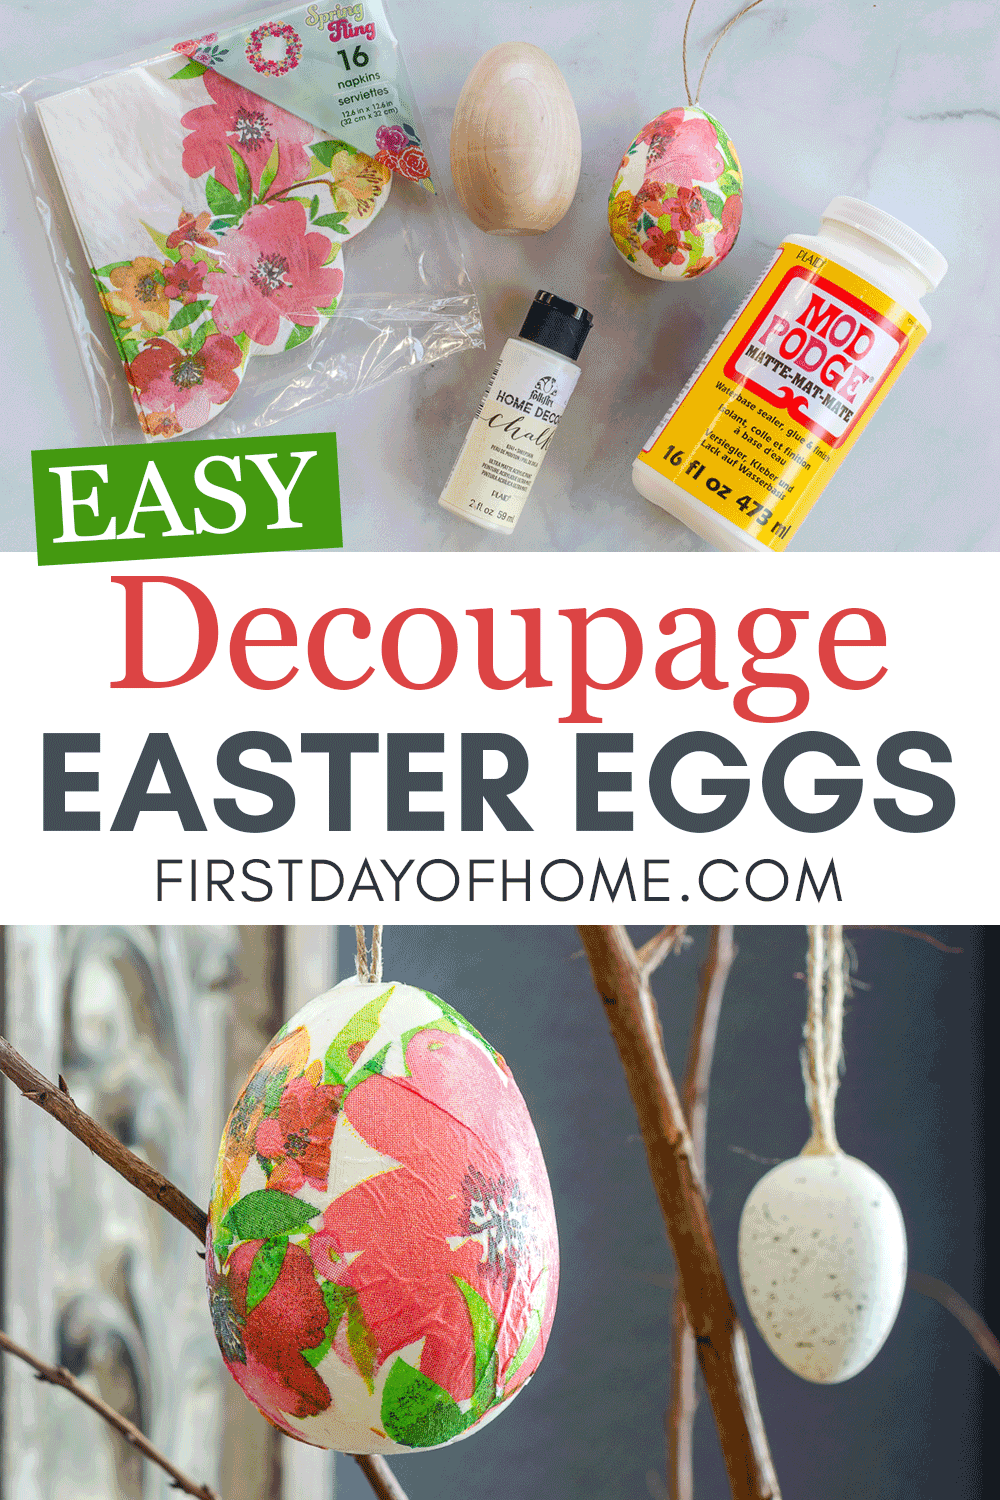 Decoupage Easter egg supplies and hanging ornament